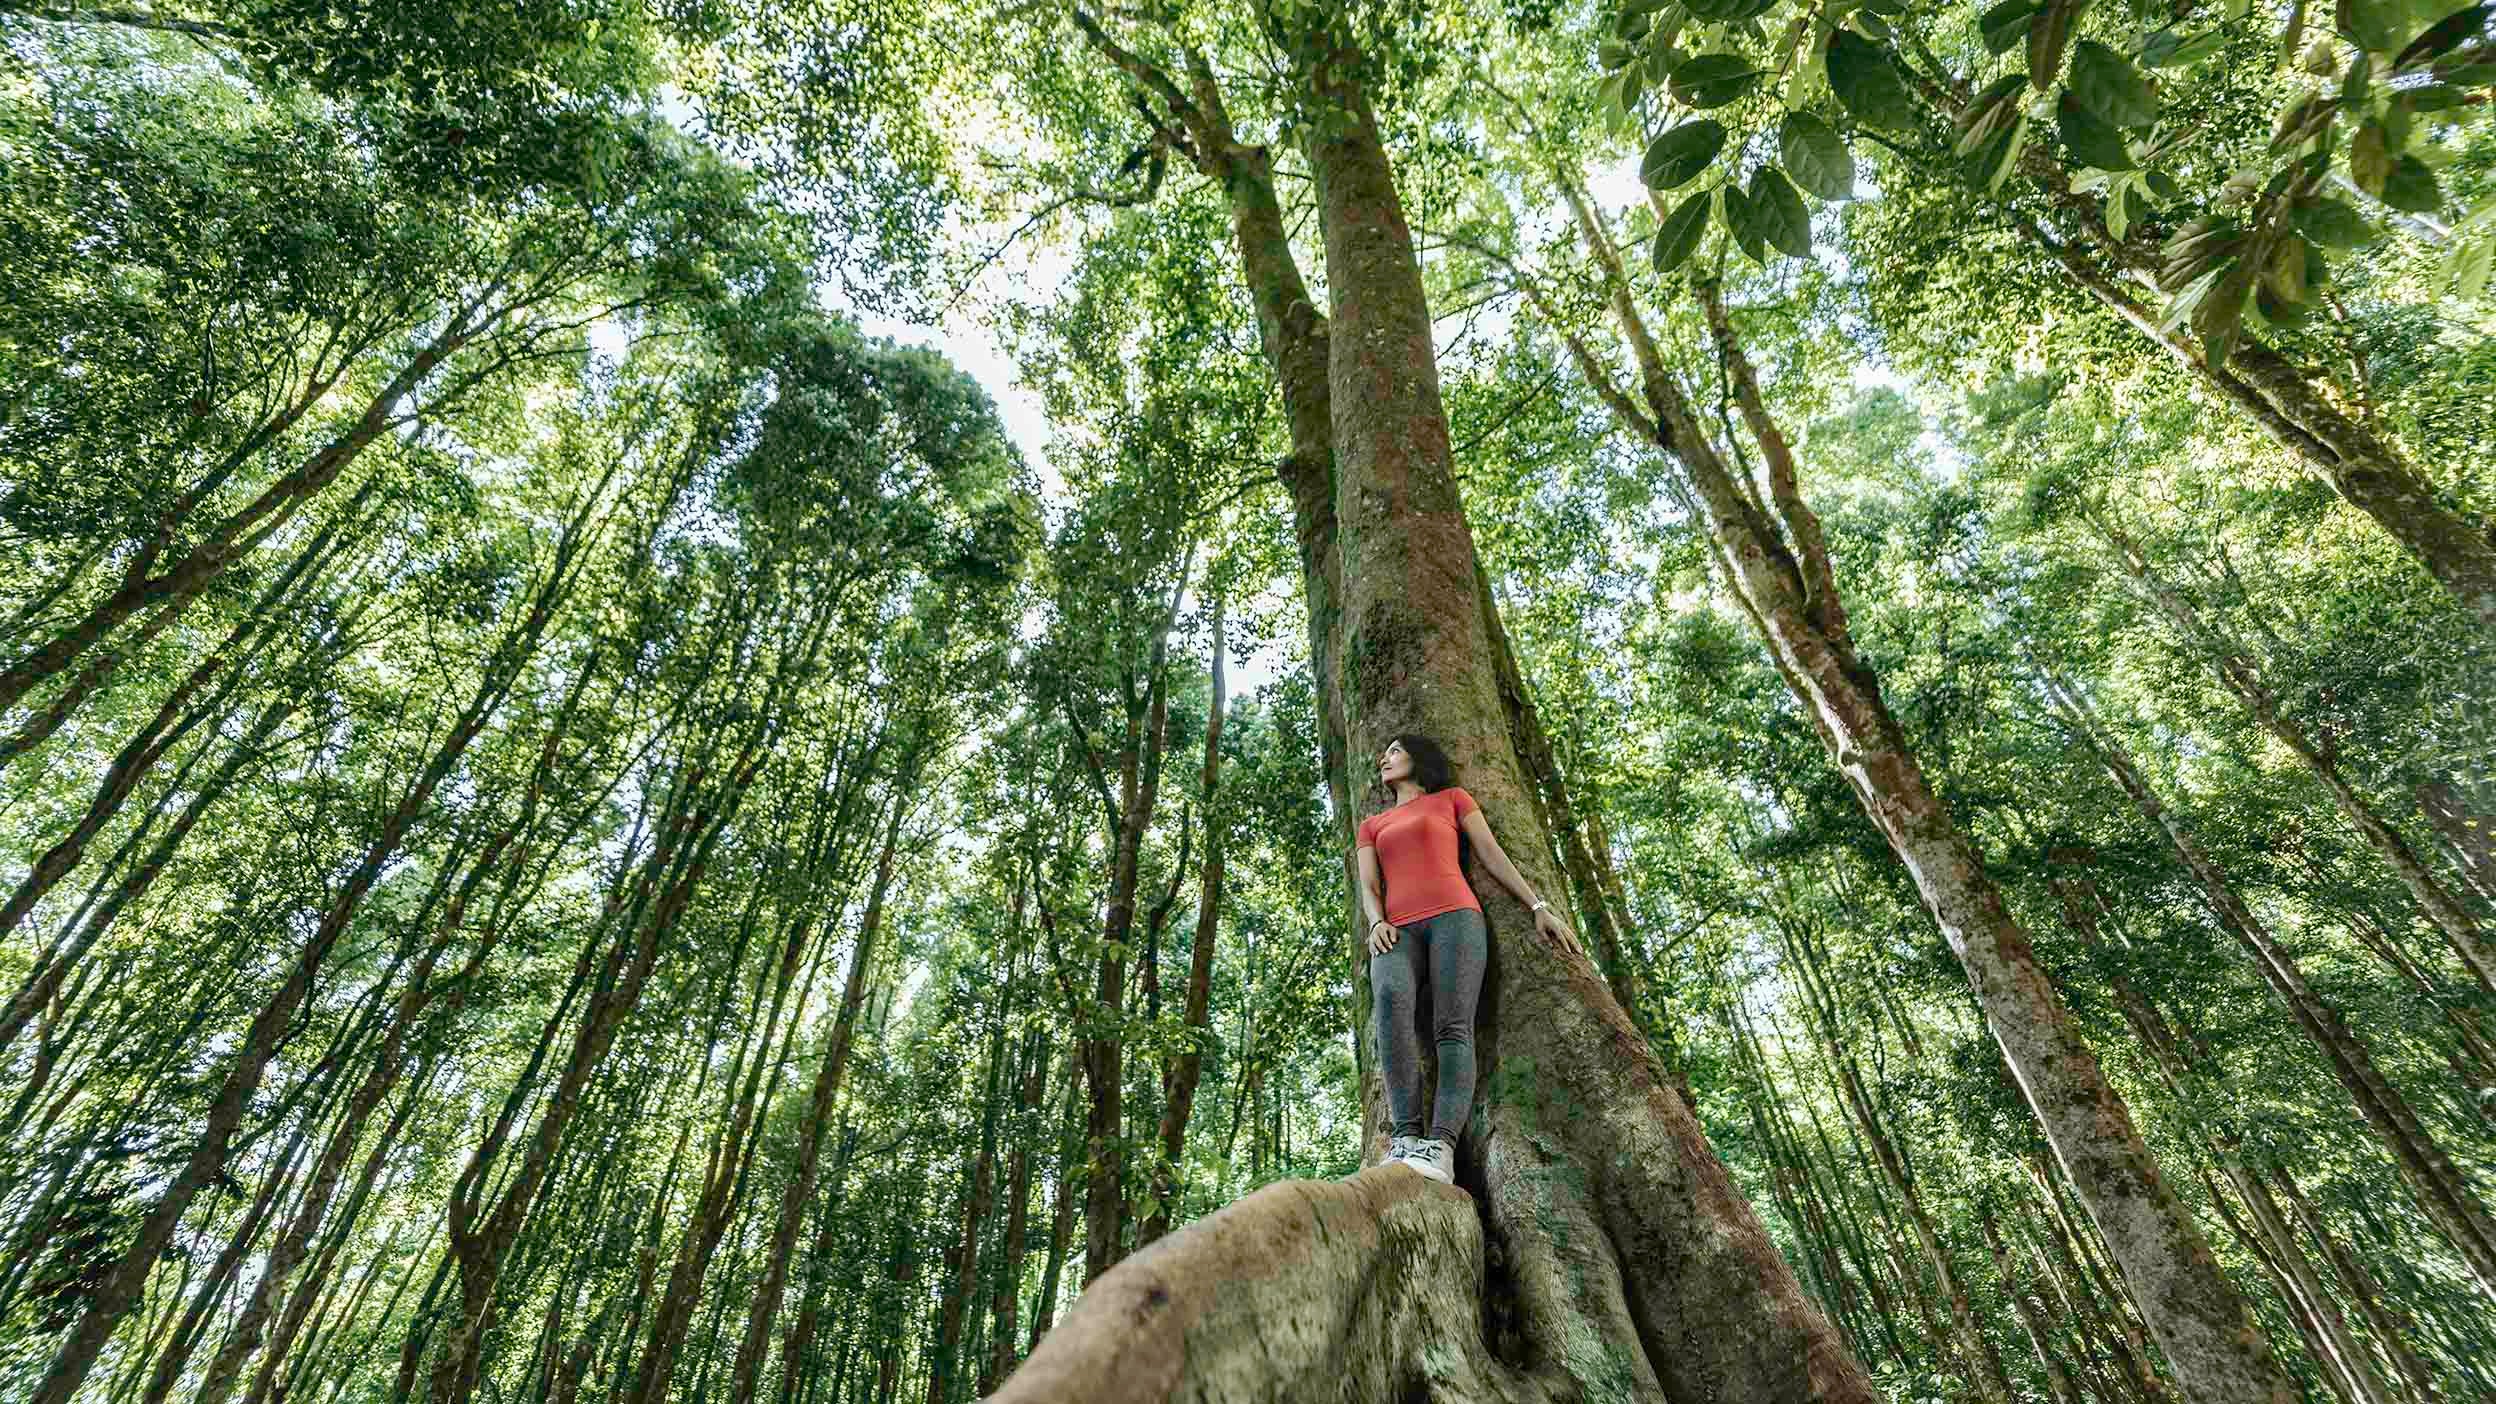 Young woman standing in tropical tree, inside a tropical rainforest setting, low angle